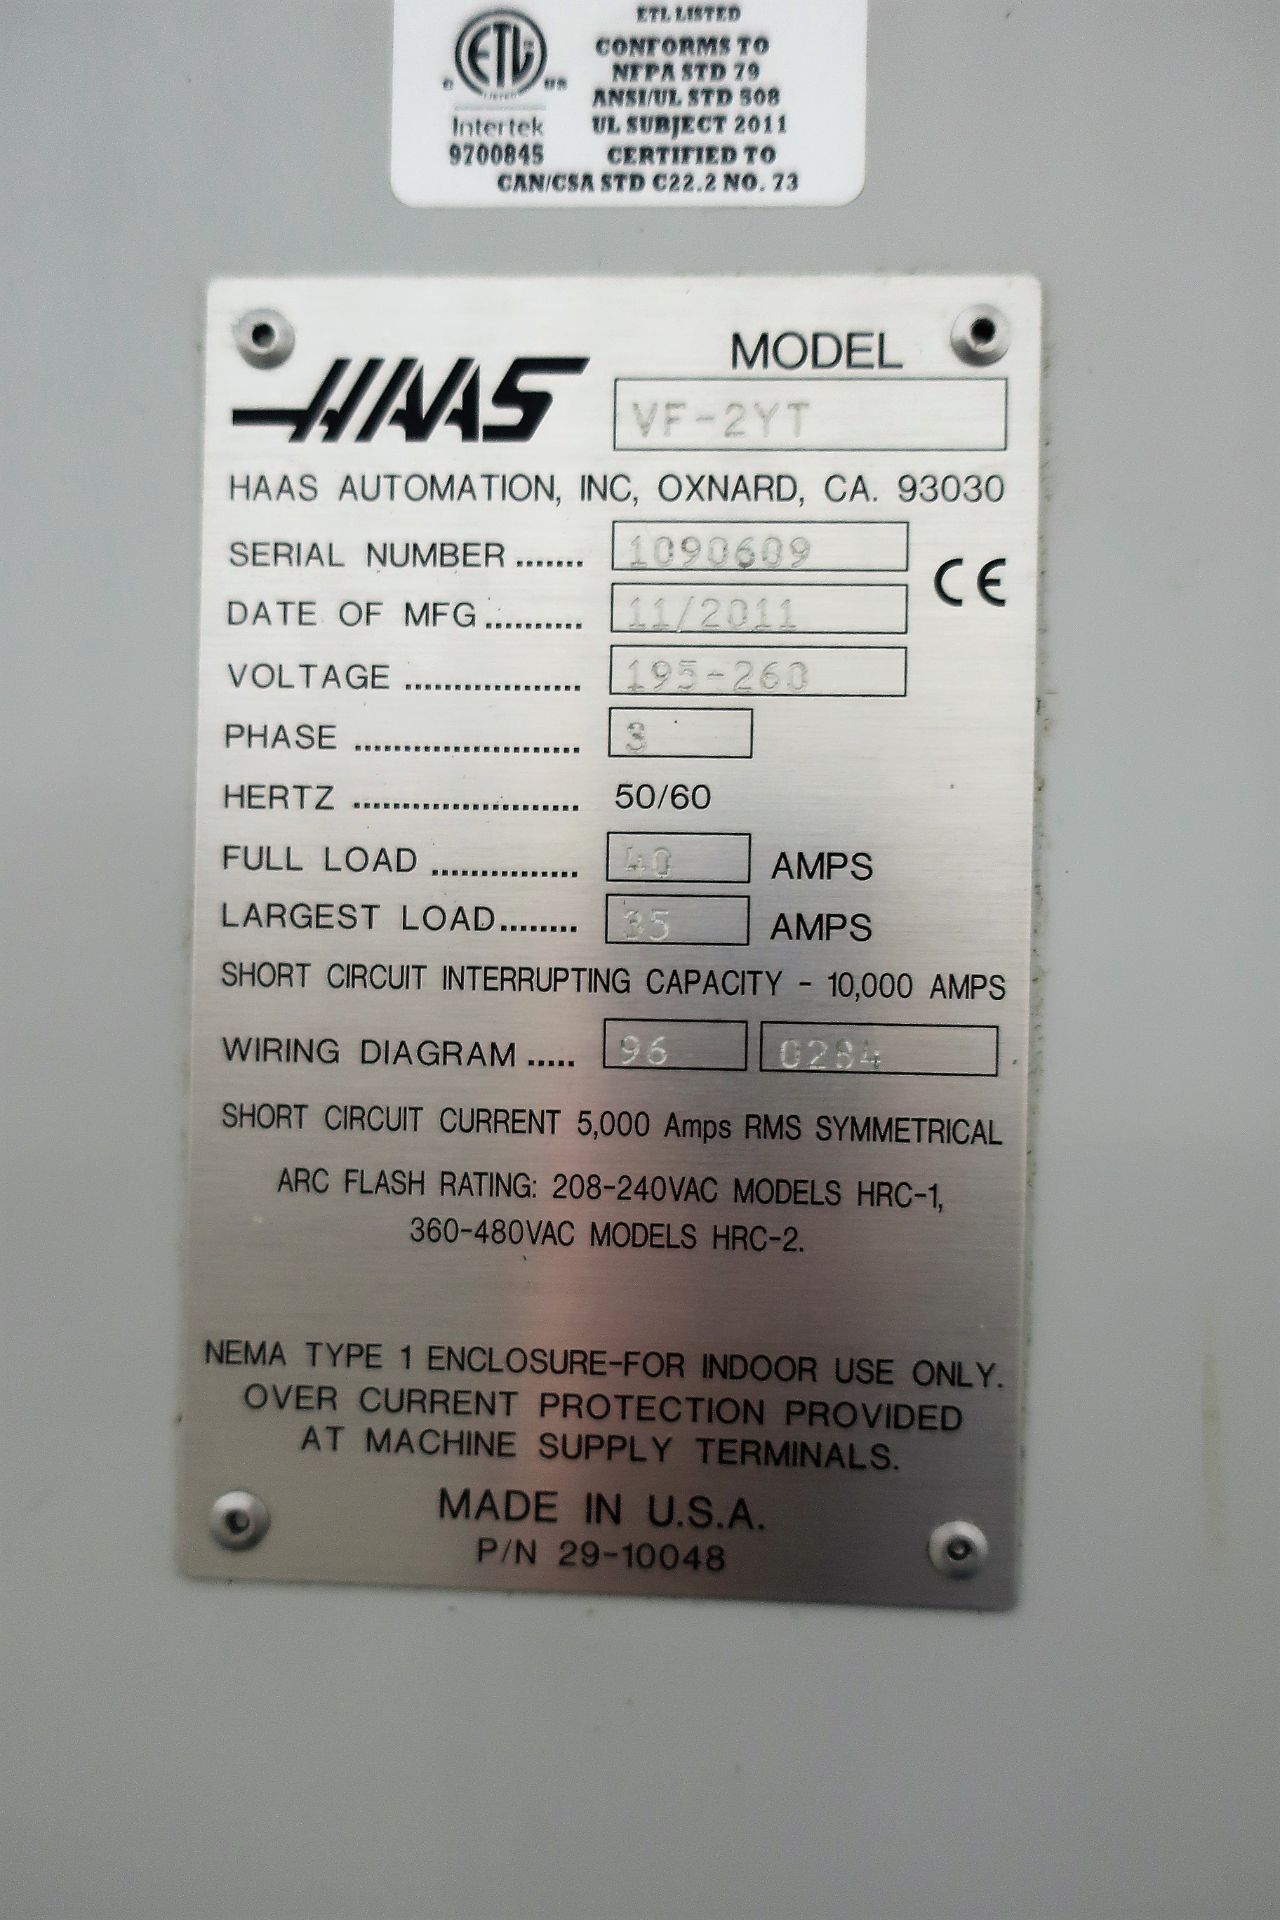 HAAS VF-2YT CNC 3-AXIS VERTICAL MACHNING CENTER, S/N 1090609, NEW 2011 - Image 11 of 11